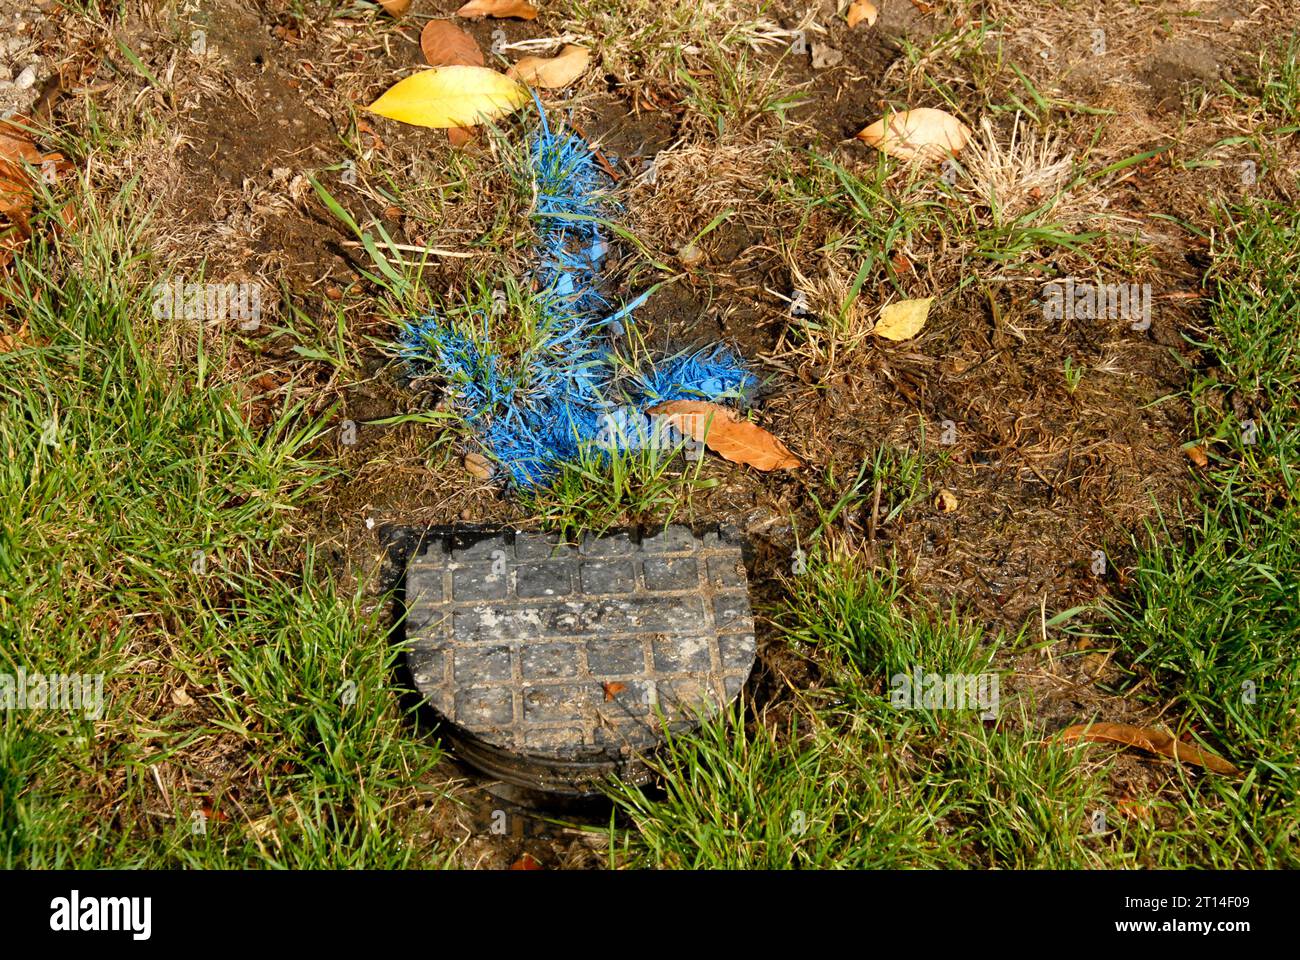 Bold blue arrow painted on grass pointing to leaking water meter that needs replacing, after survey and before repairs start Stock Photo